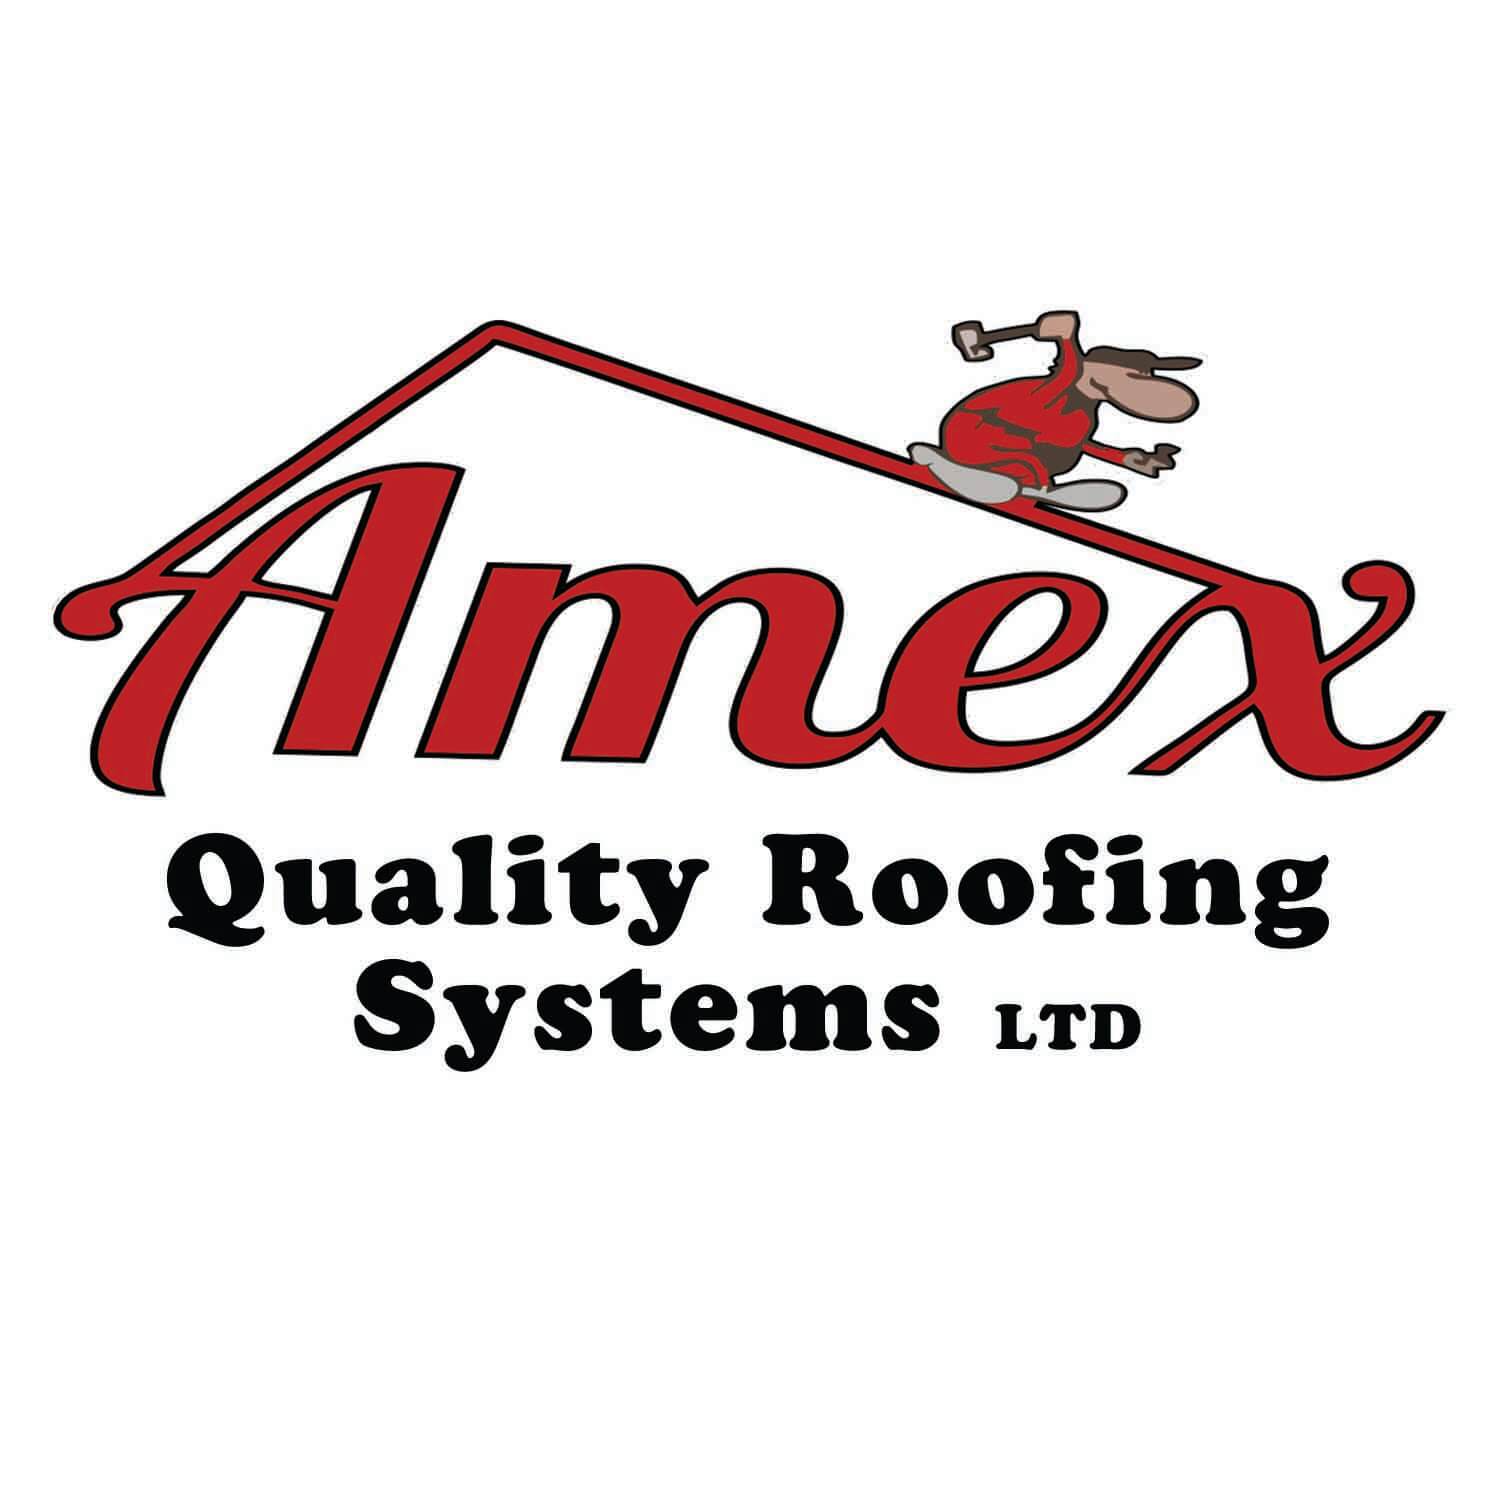 Amex Roofing and Drainage Ltd